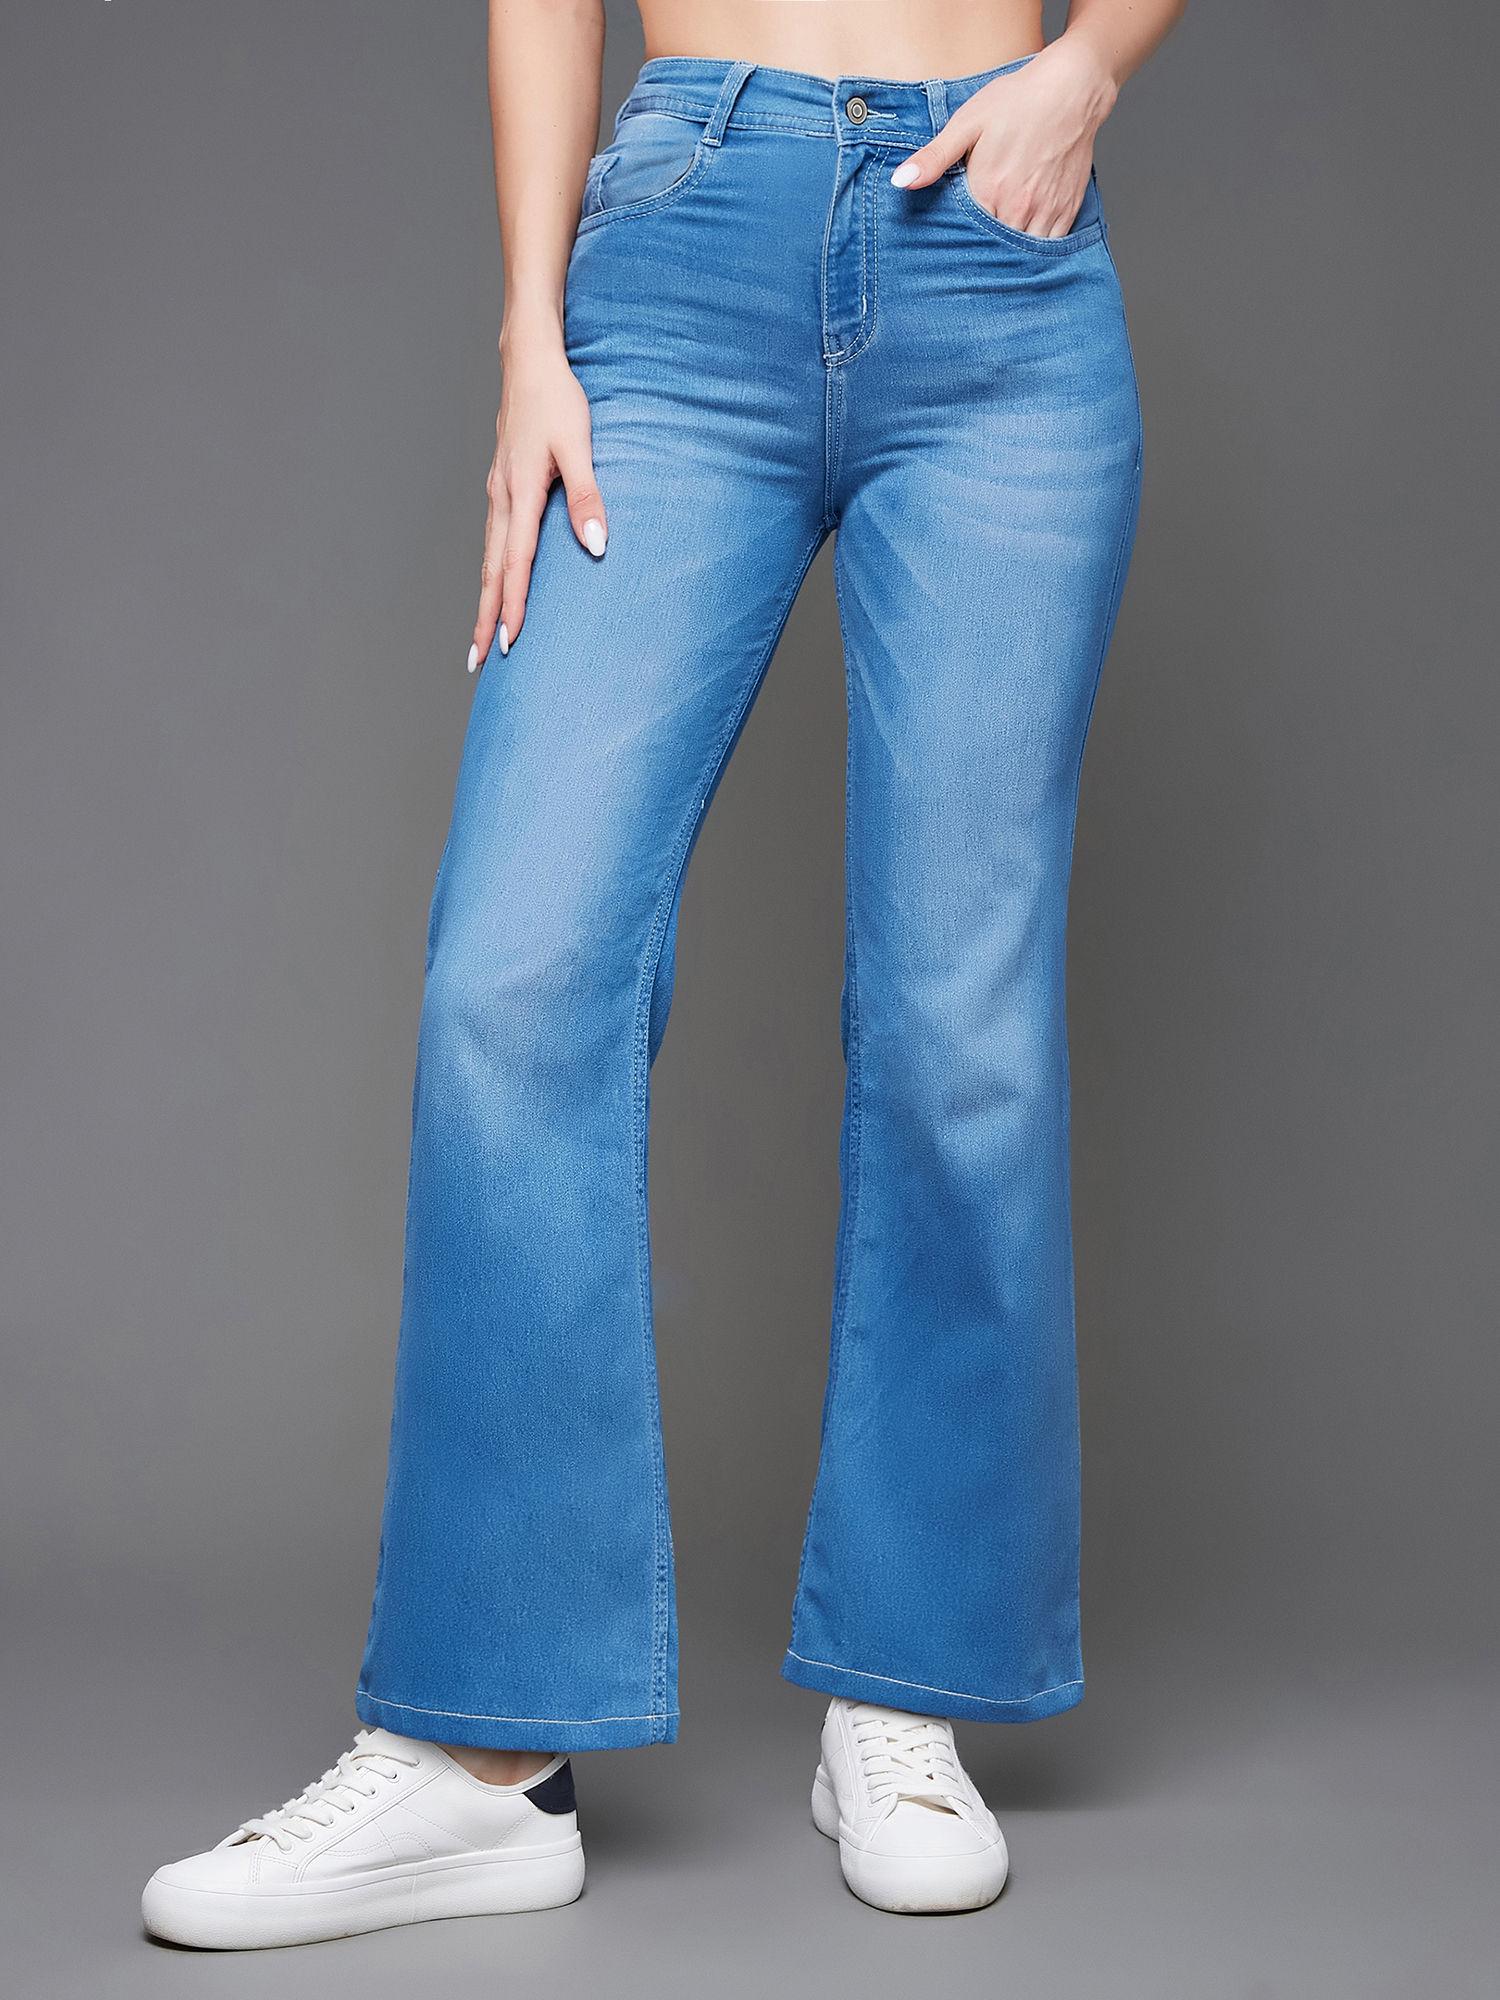 womens light blue relaxed mid rise regular stretchable denim jeans